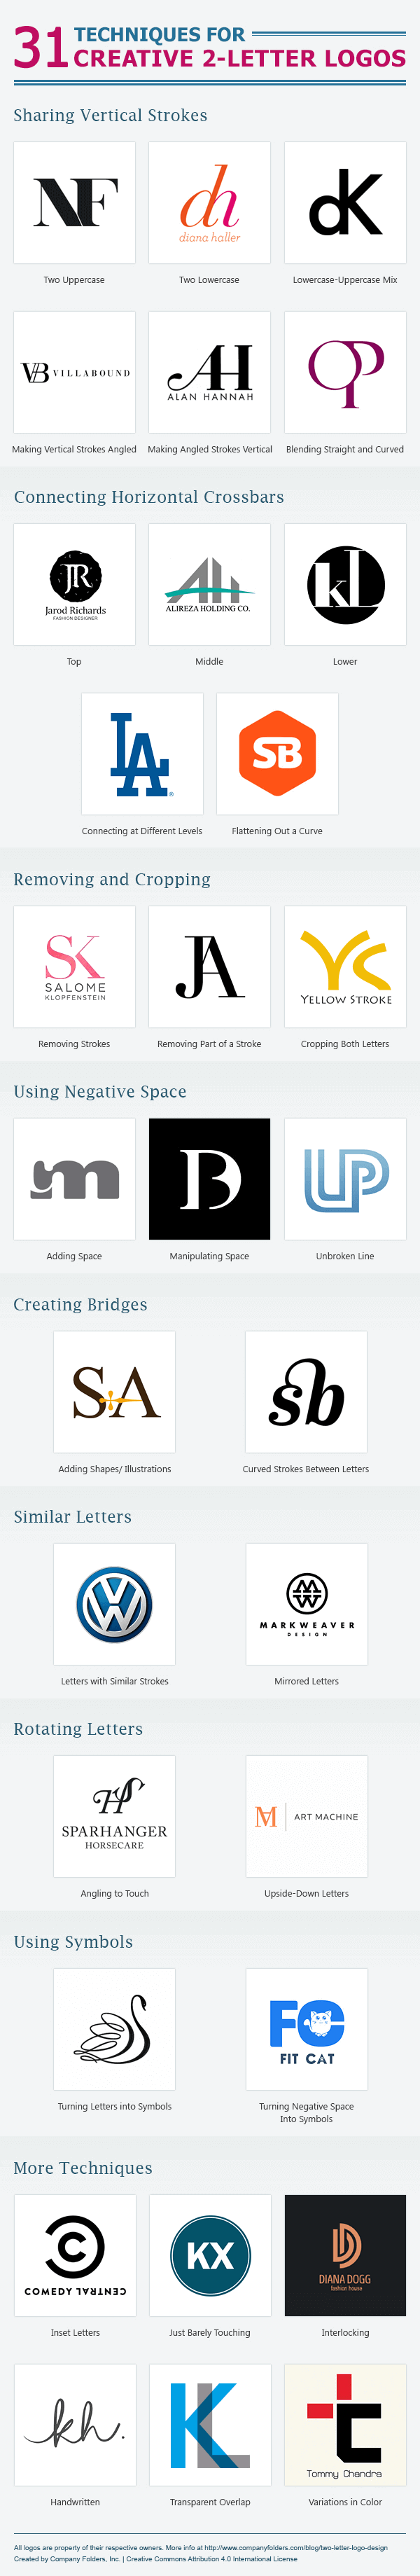 How To Create Letter Logos Instantly